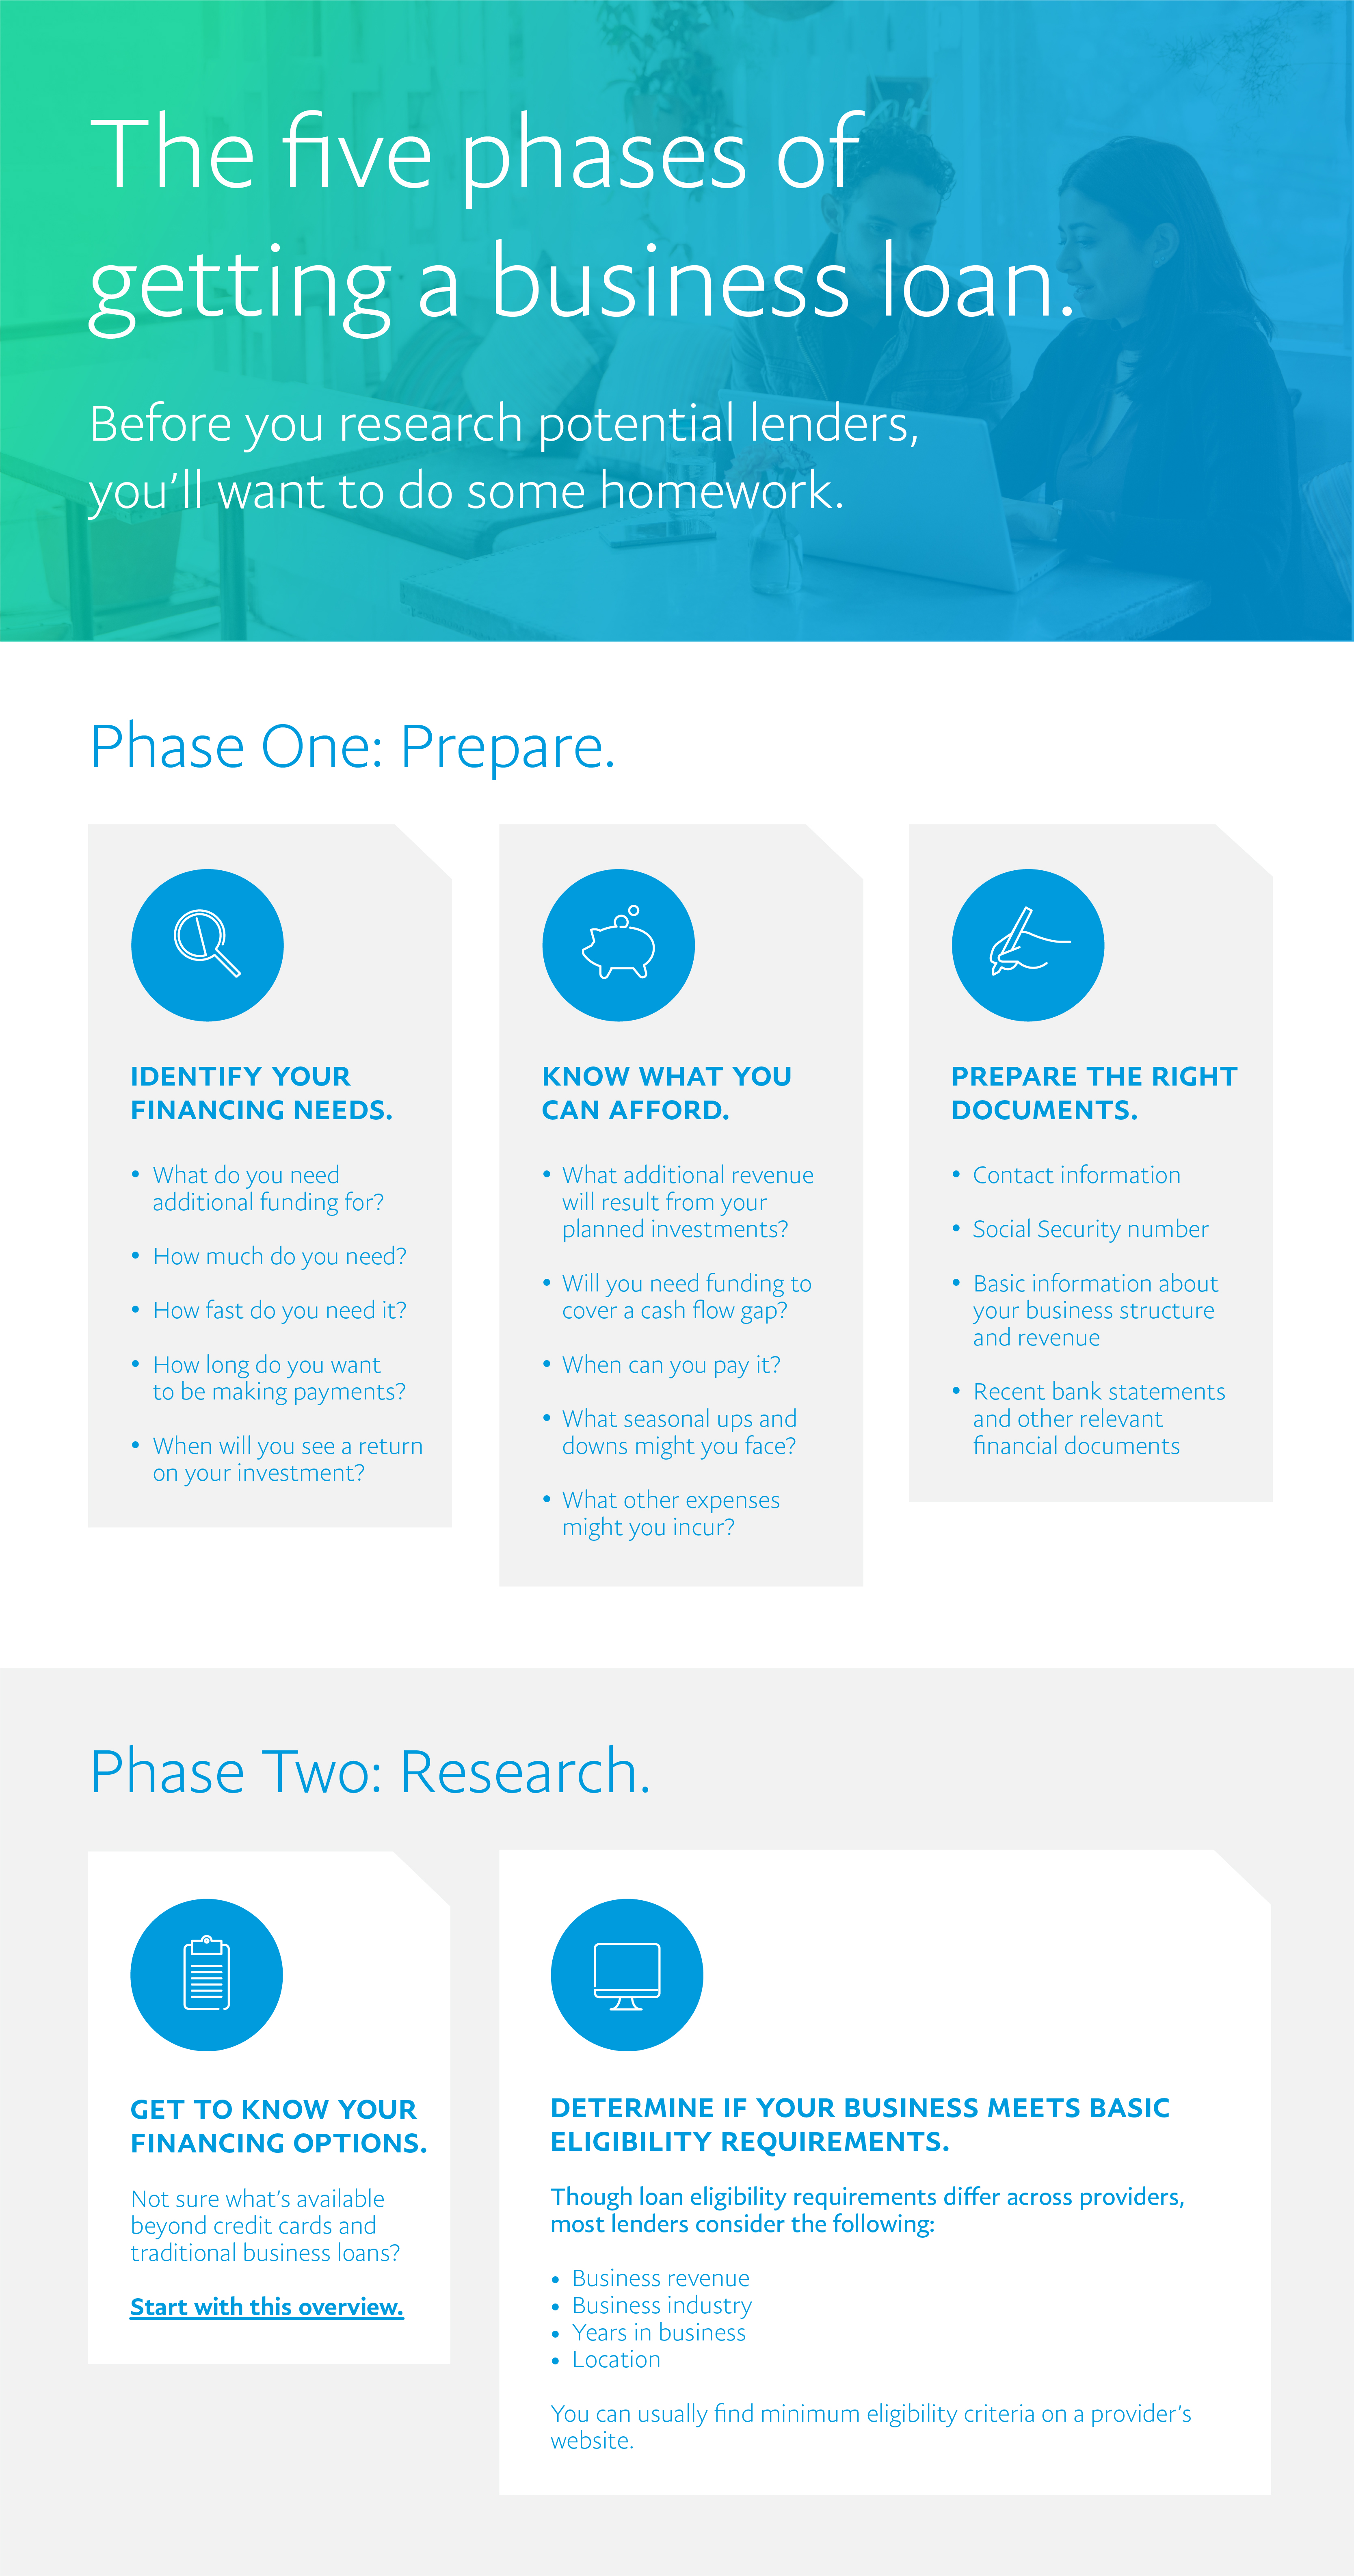 Text listing and describing the 5 phases of getting a business loan.